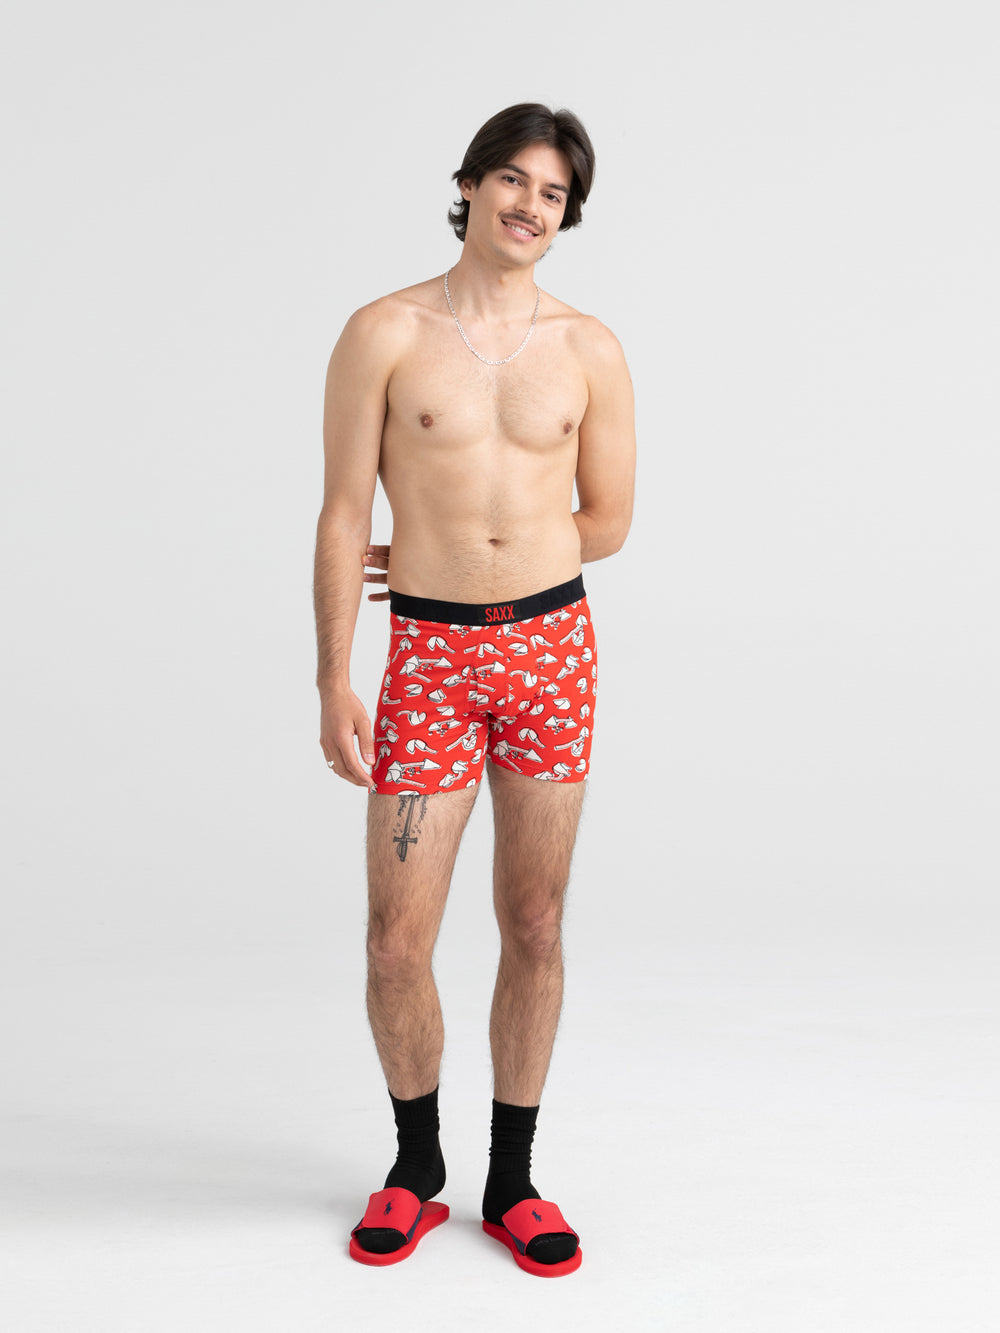 SAXX ULTRA BOXER BRIEF - MISFORTUNE COOKIE - CLEARANCE